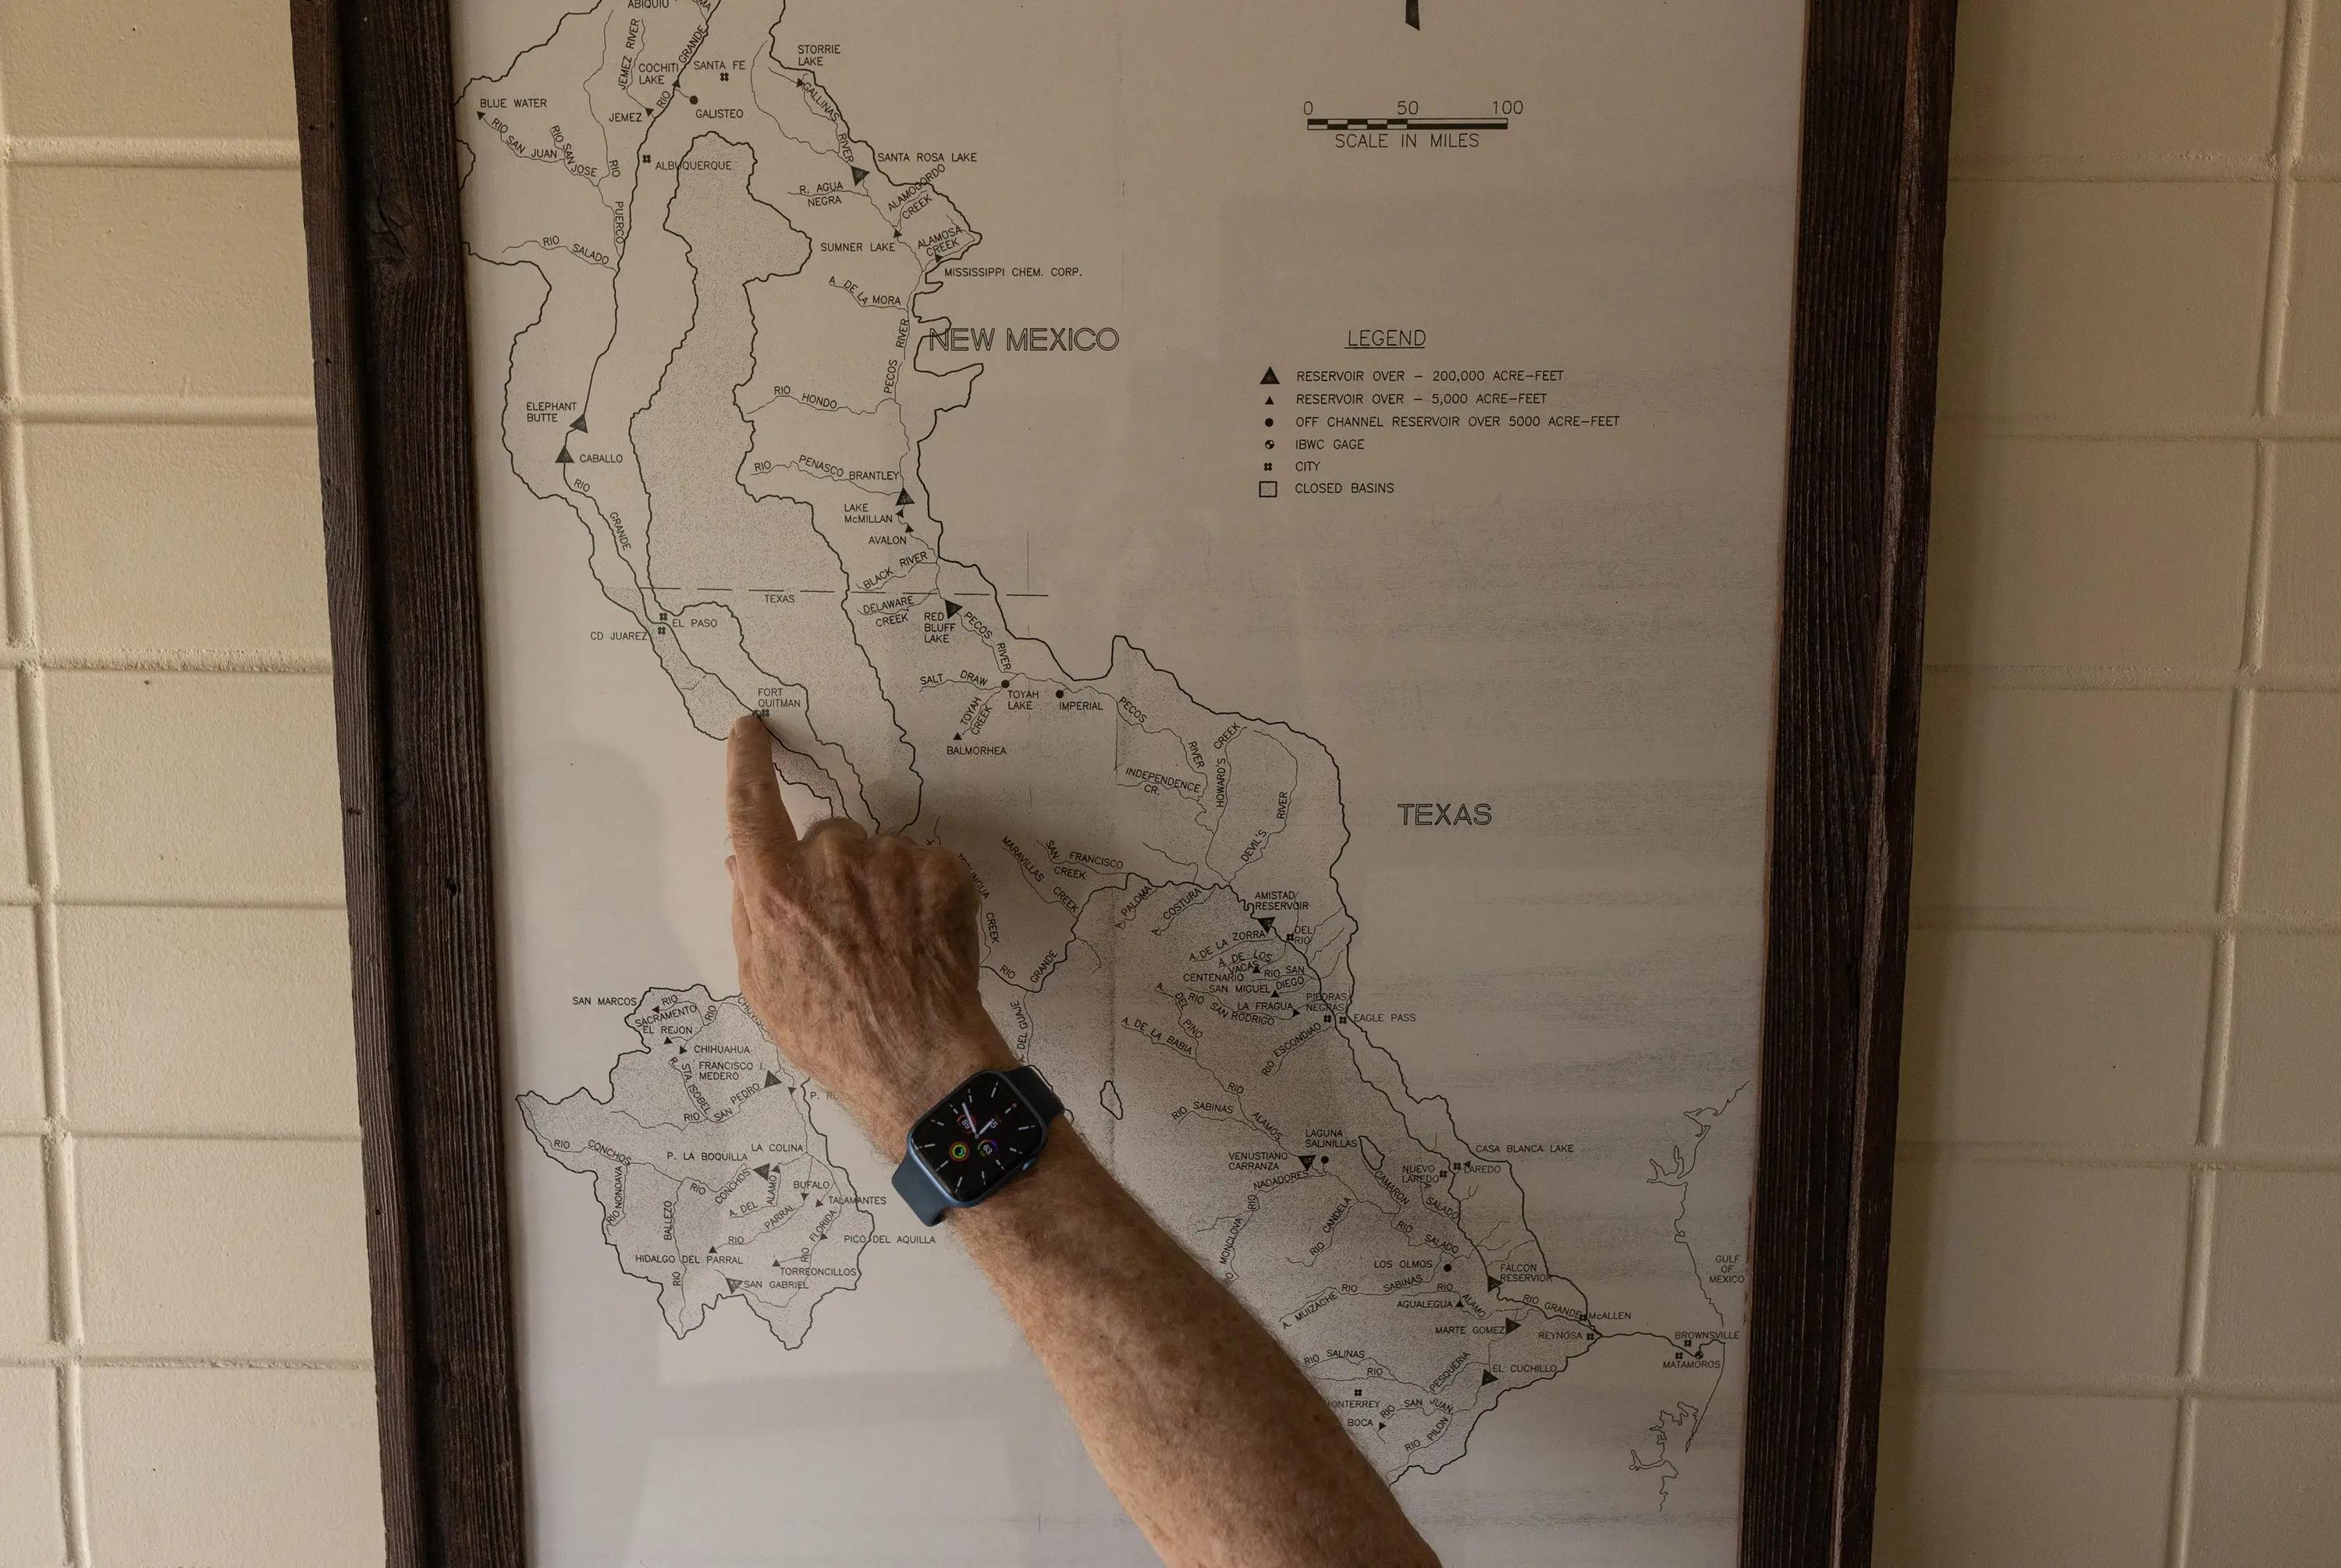 A person's arm points out a spot on a map.